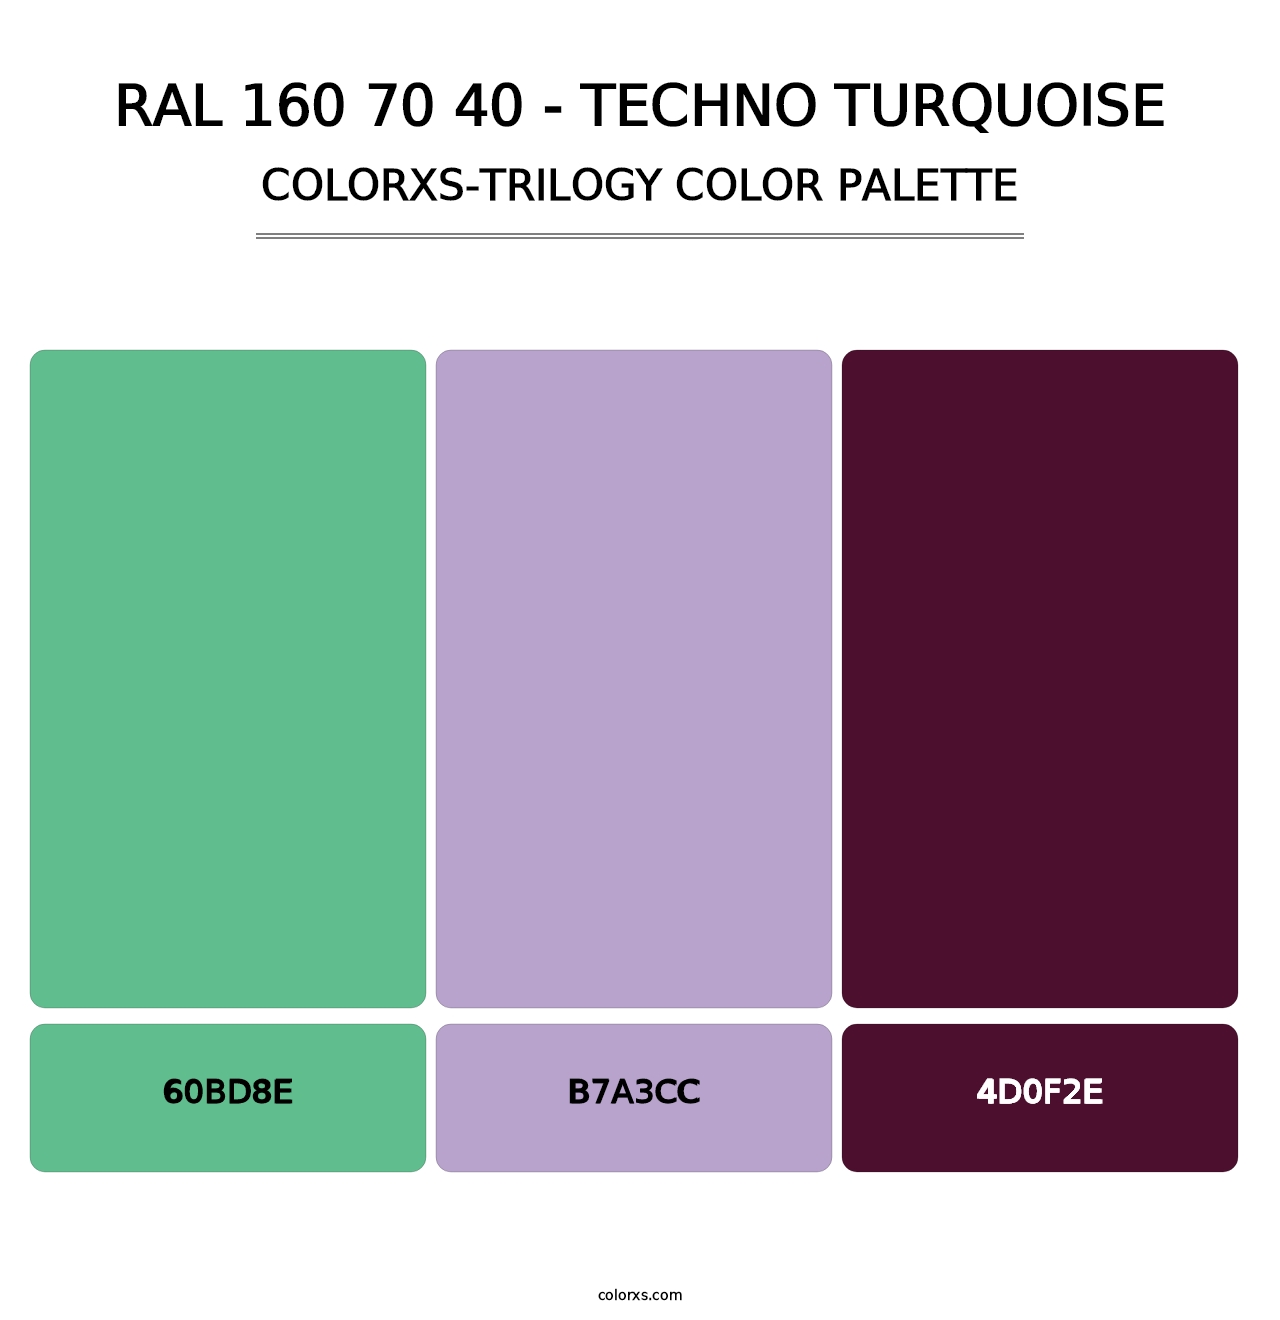 RAL 160 70 40 - Techno Turquoise - Colorxs Trilogy Palette